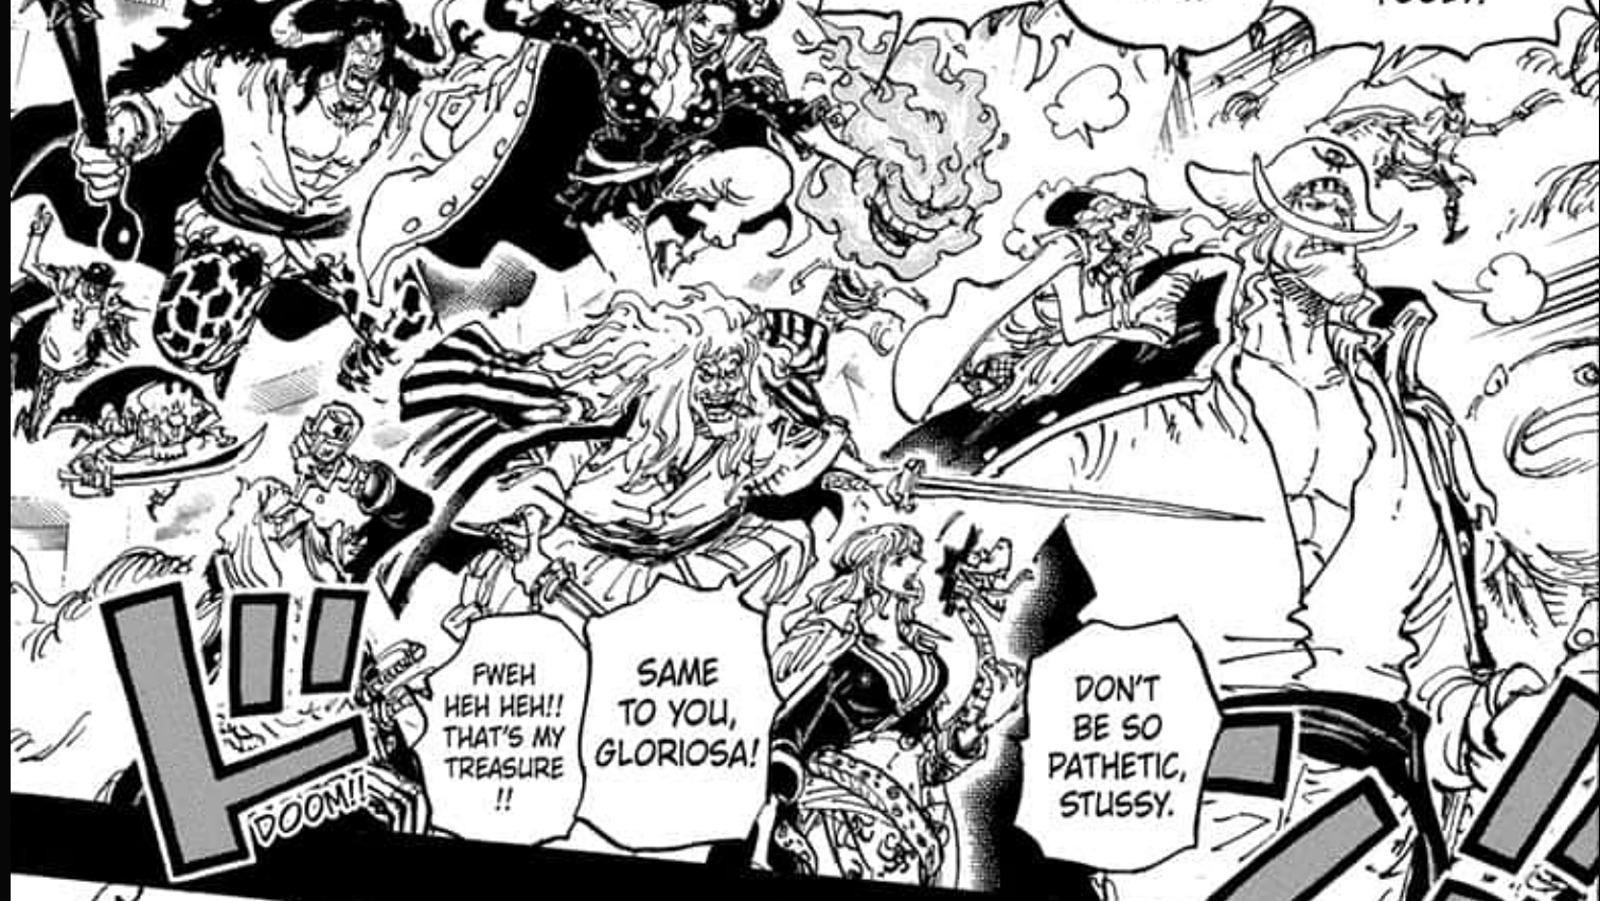 A One Piece panel featuring all Rocks Pirates members